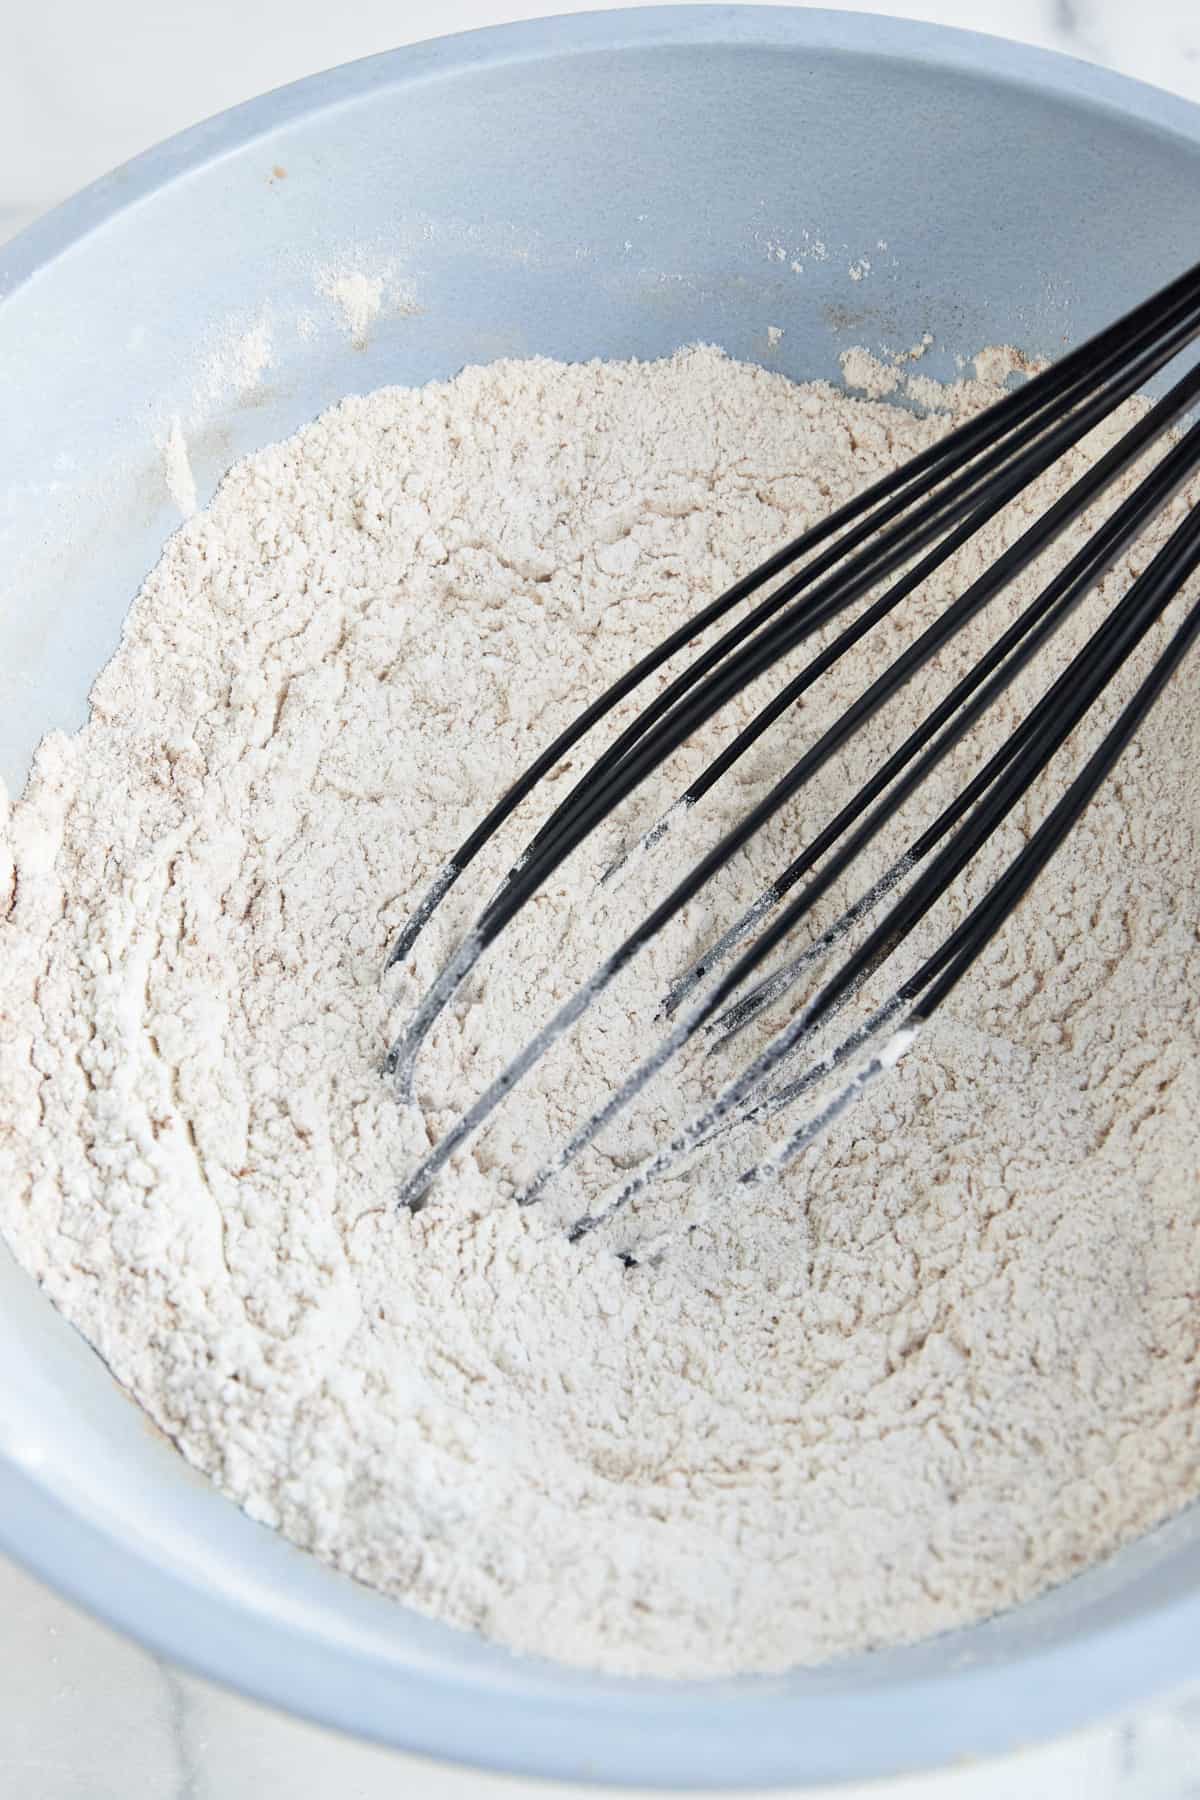 Dry muffin batter ingredients being whisked in a blue bowl. 